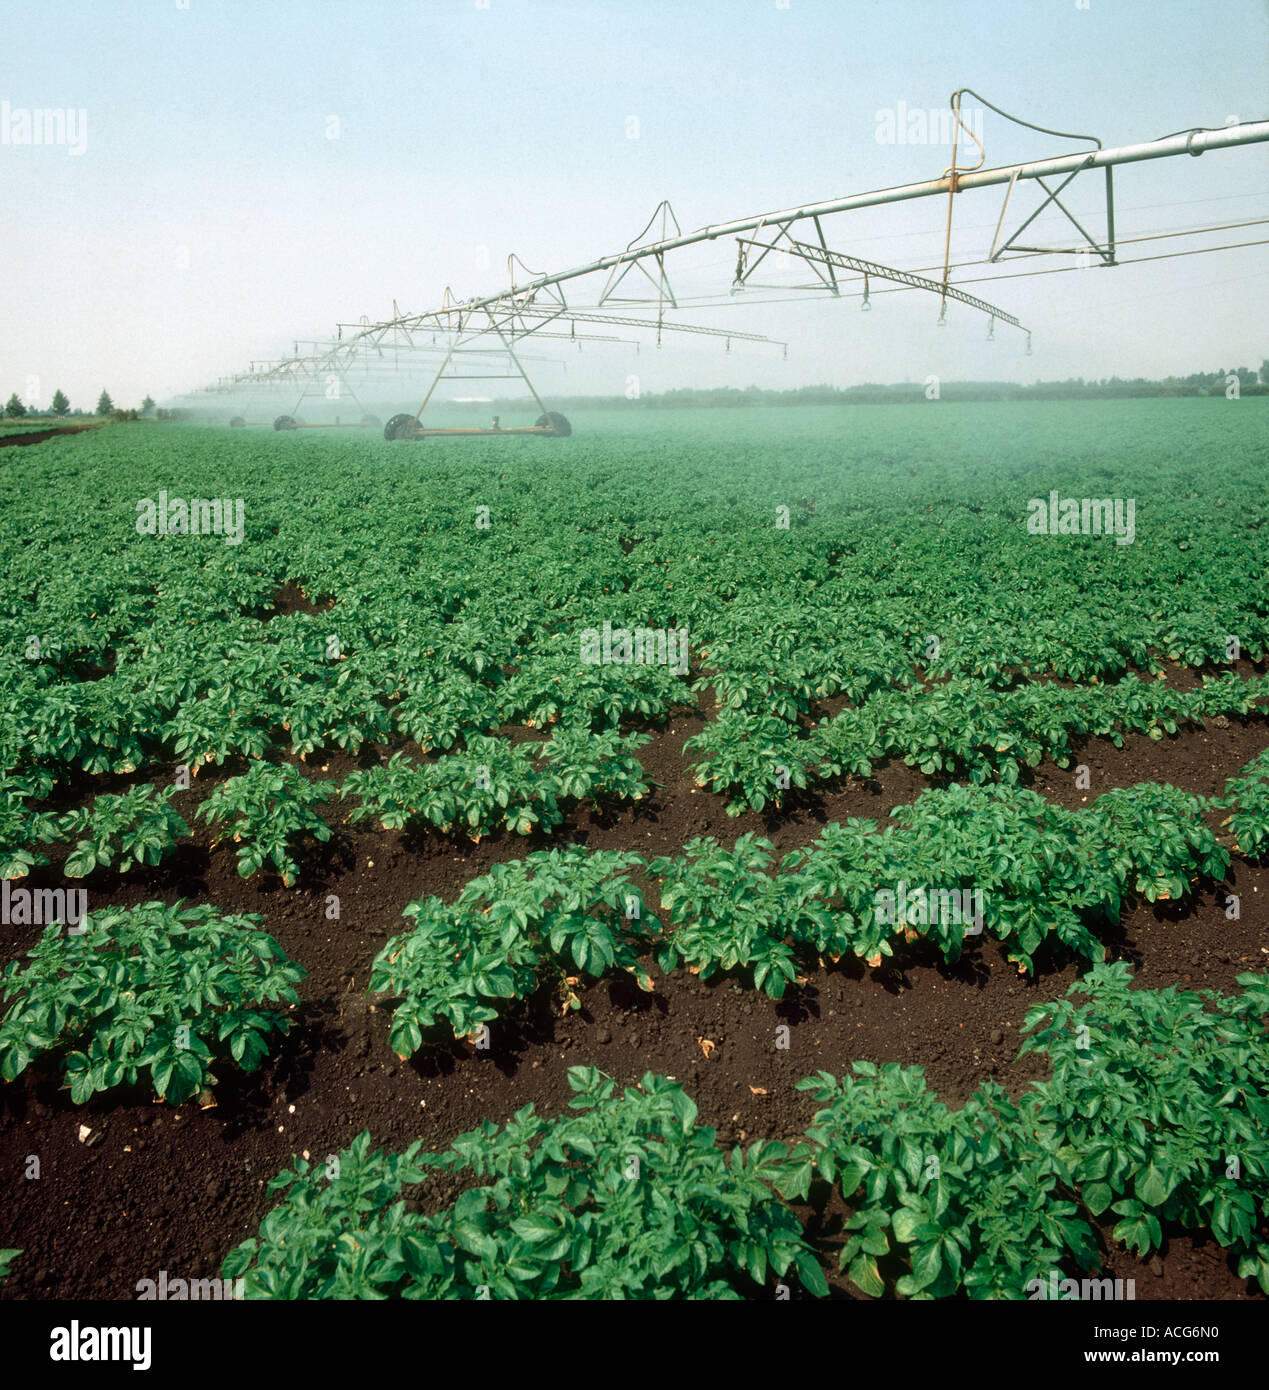 Mid term potato crop with large linear sprinkler irrigation boom in operation Stock Photo